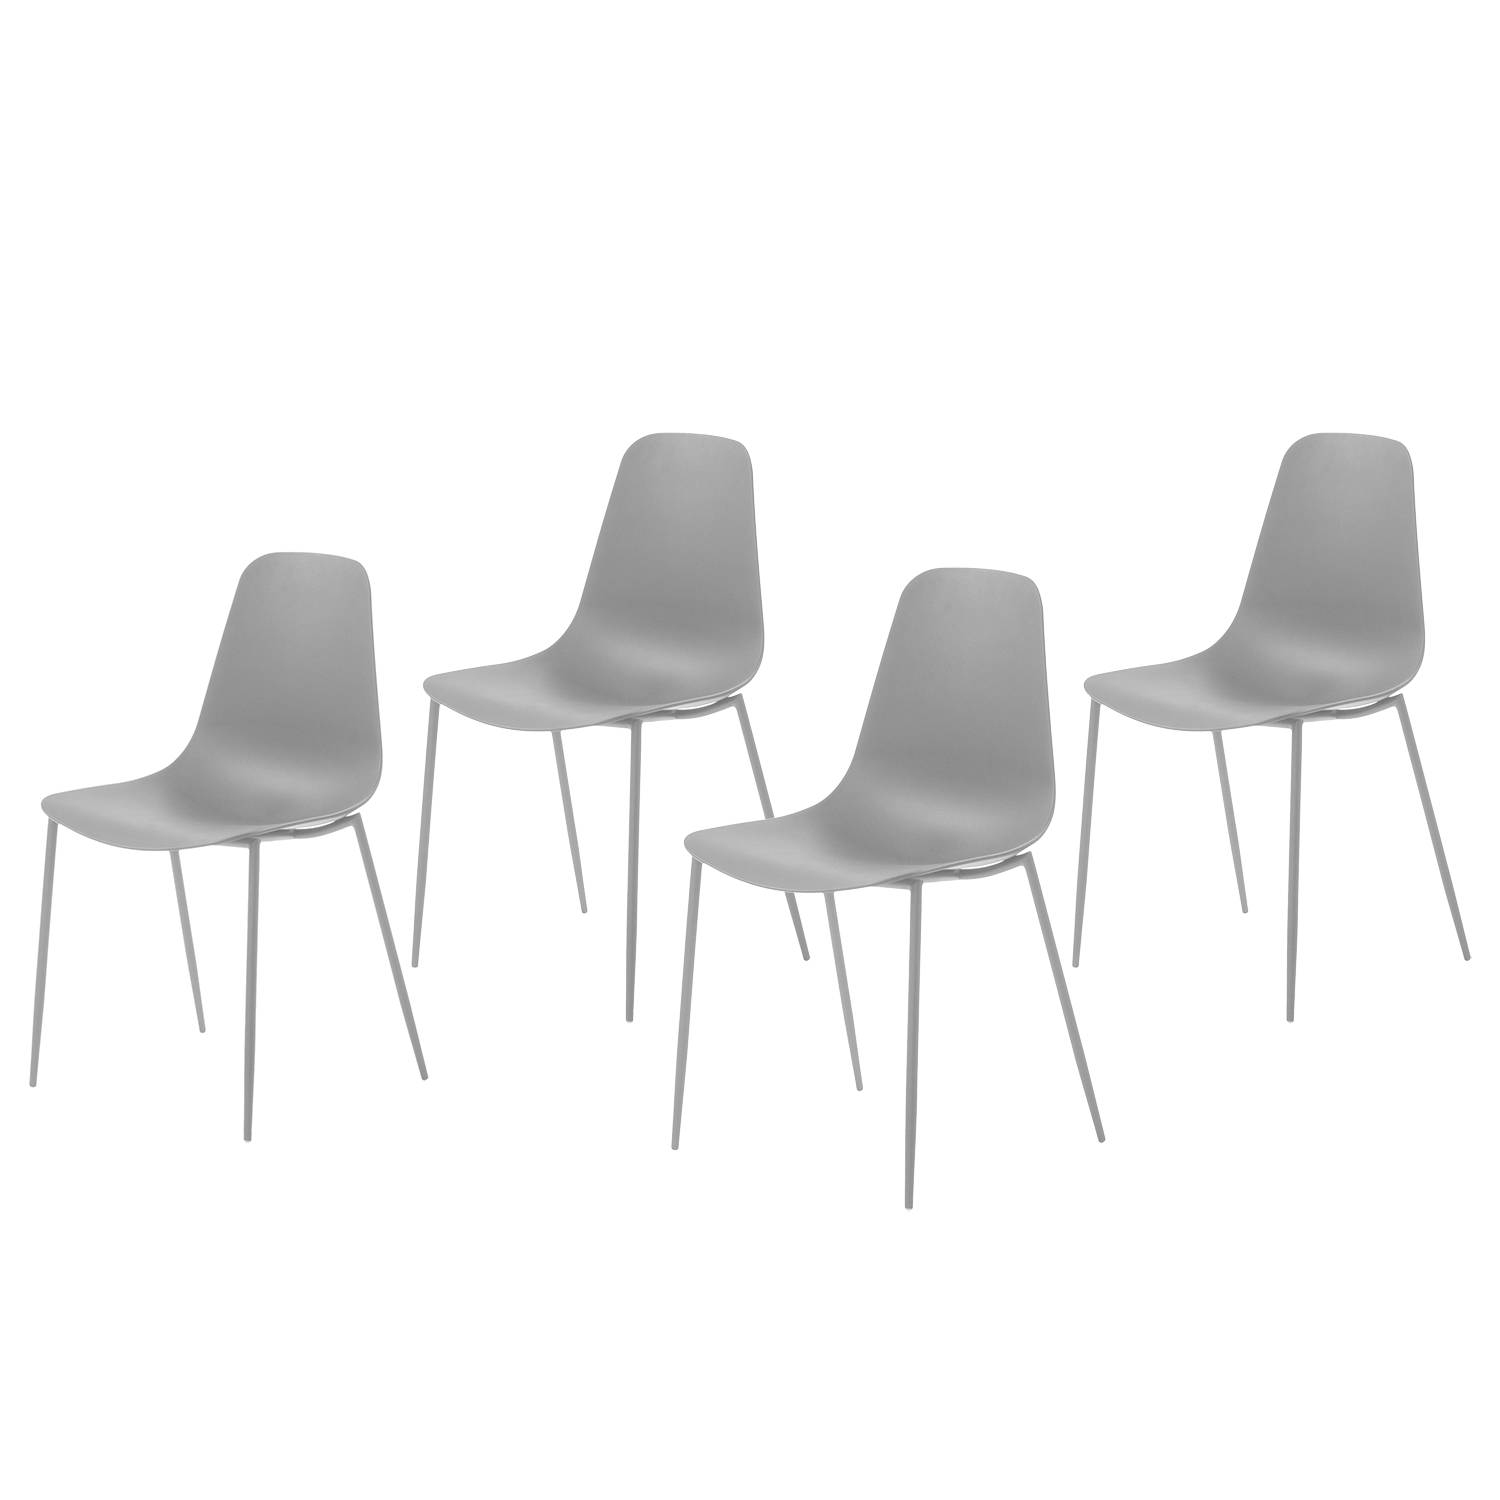 Image of Chaises Whatts (lot de 4) 000000001000128768